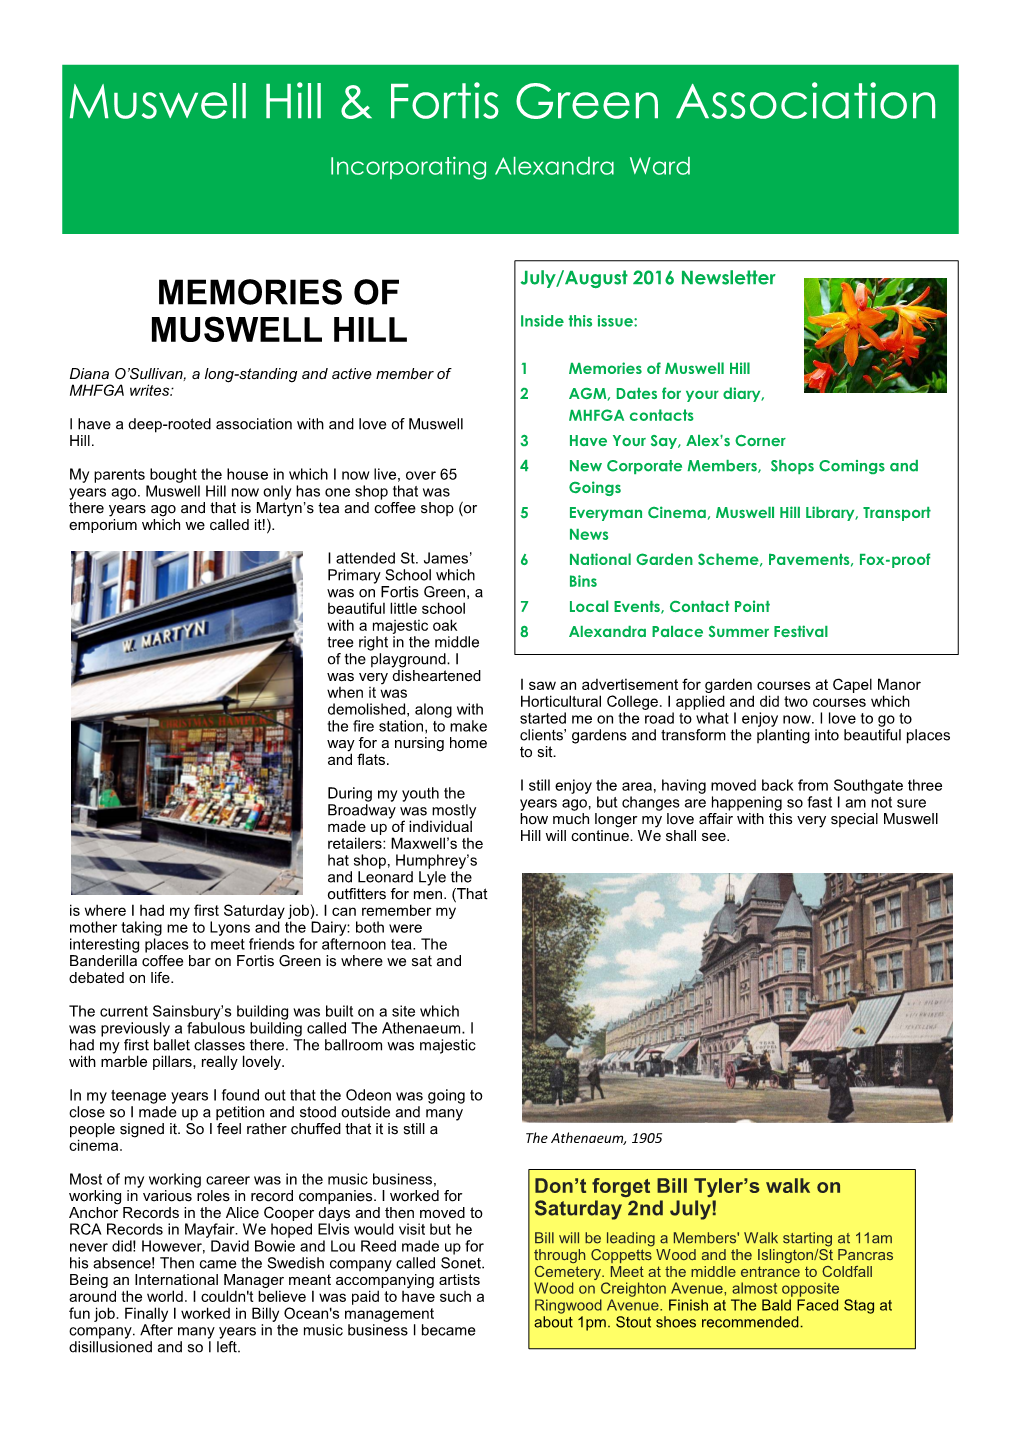 Memories of Muswell Hill MHFGA Writes: 2 AGM, Dates for Your Diary